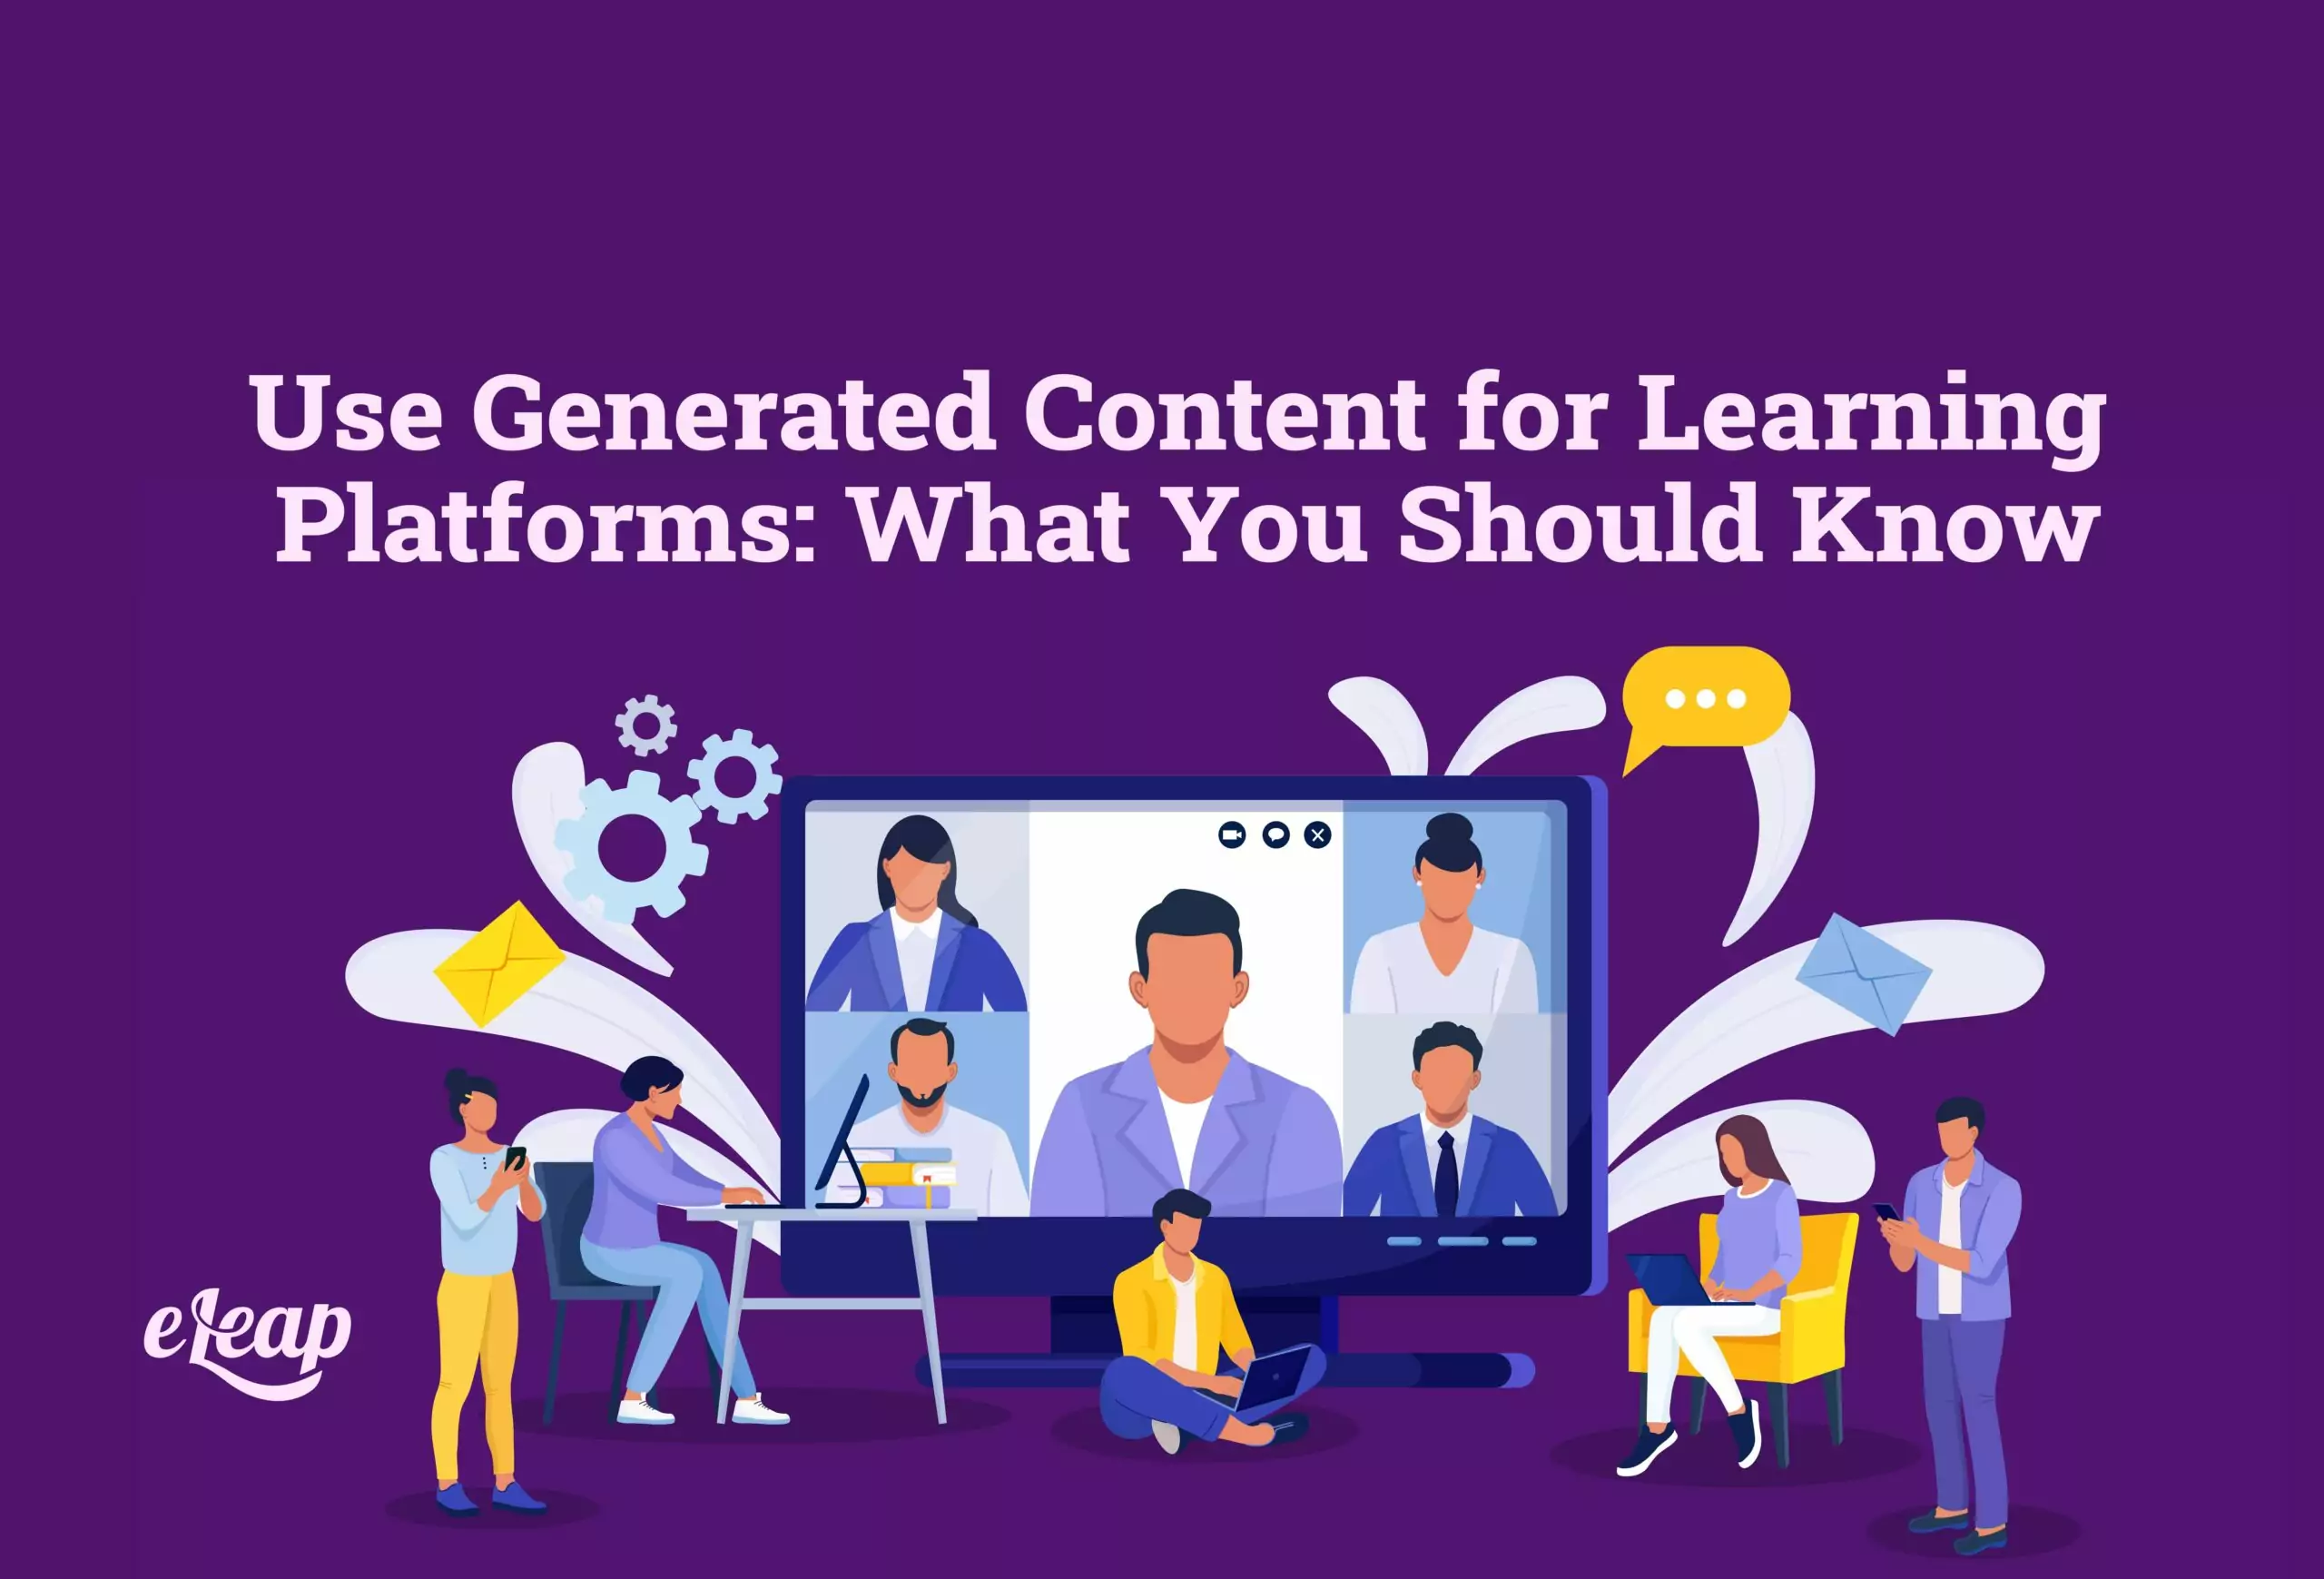 Use Generated Content for Learning Platforms: What You Should Know